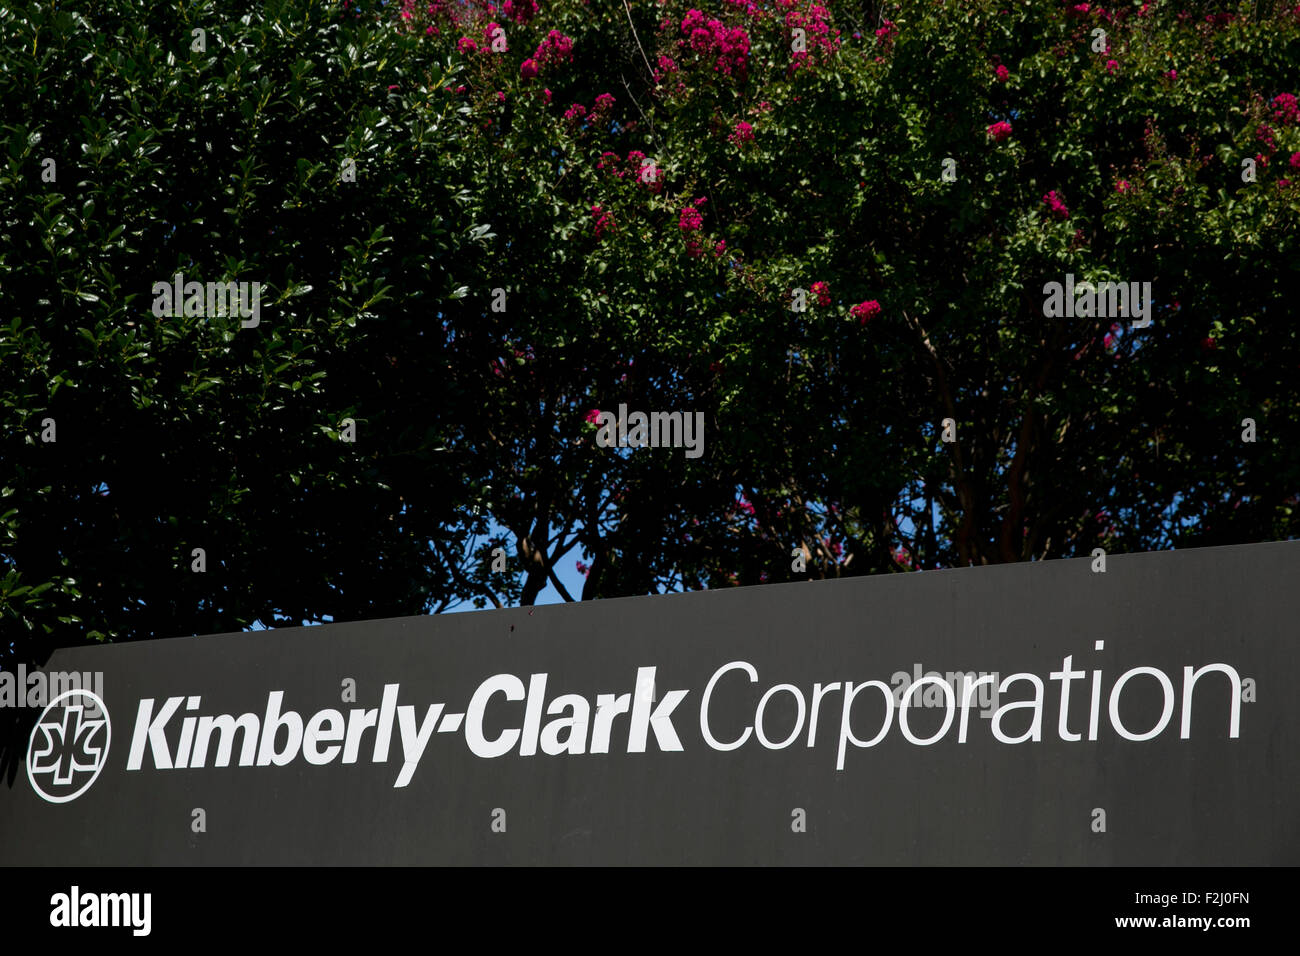 A logo sign outside of the headquarters of the Kimberly-Clark Corporation in Irving, Texas on September 13, 2015. Stock Photo